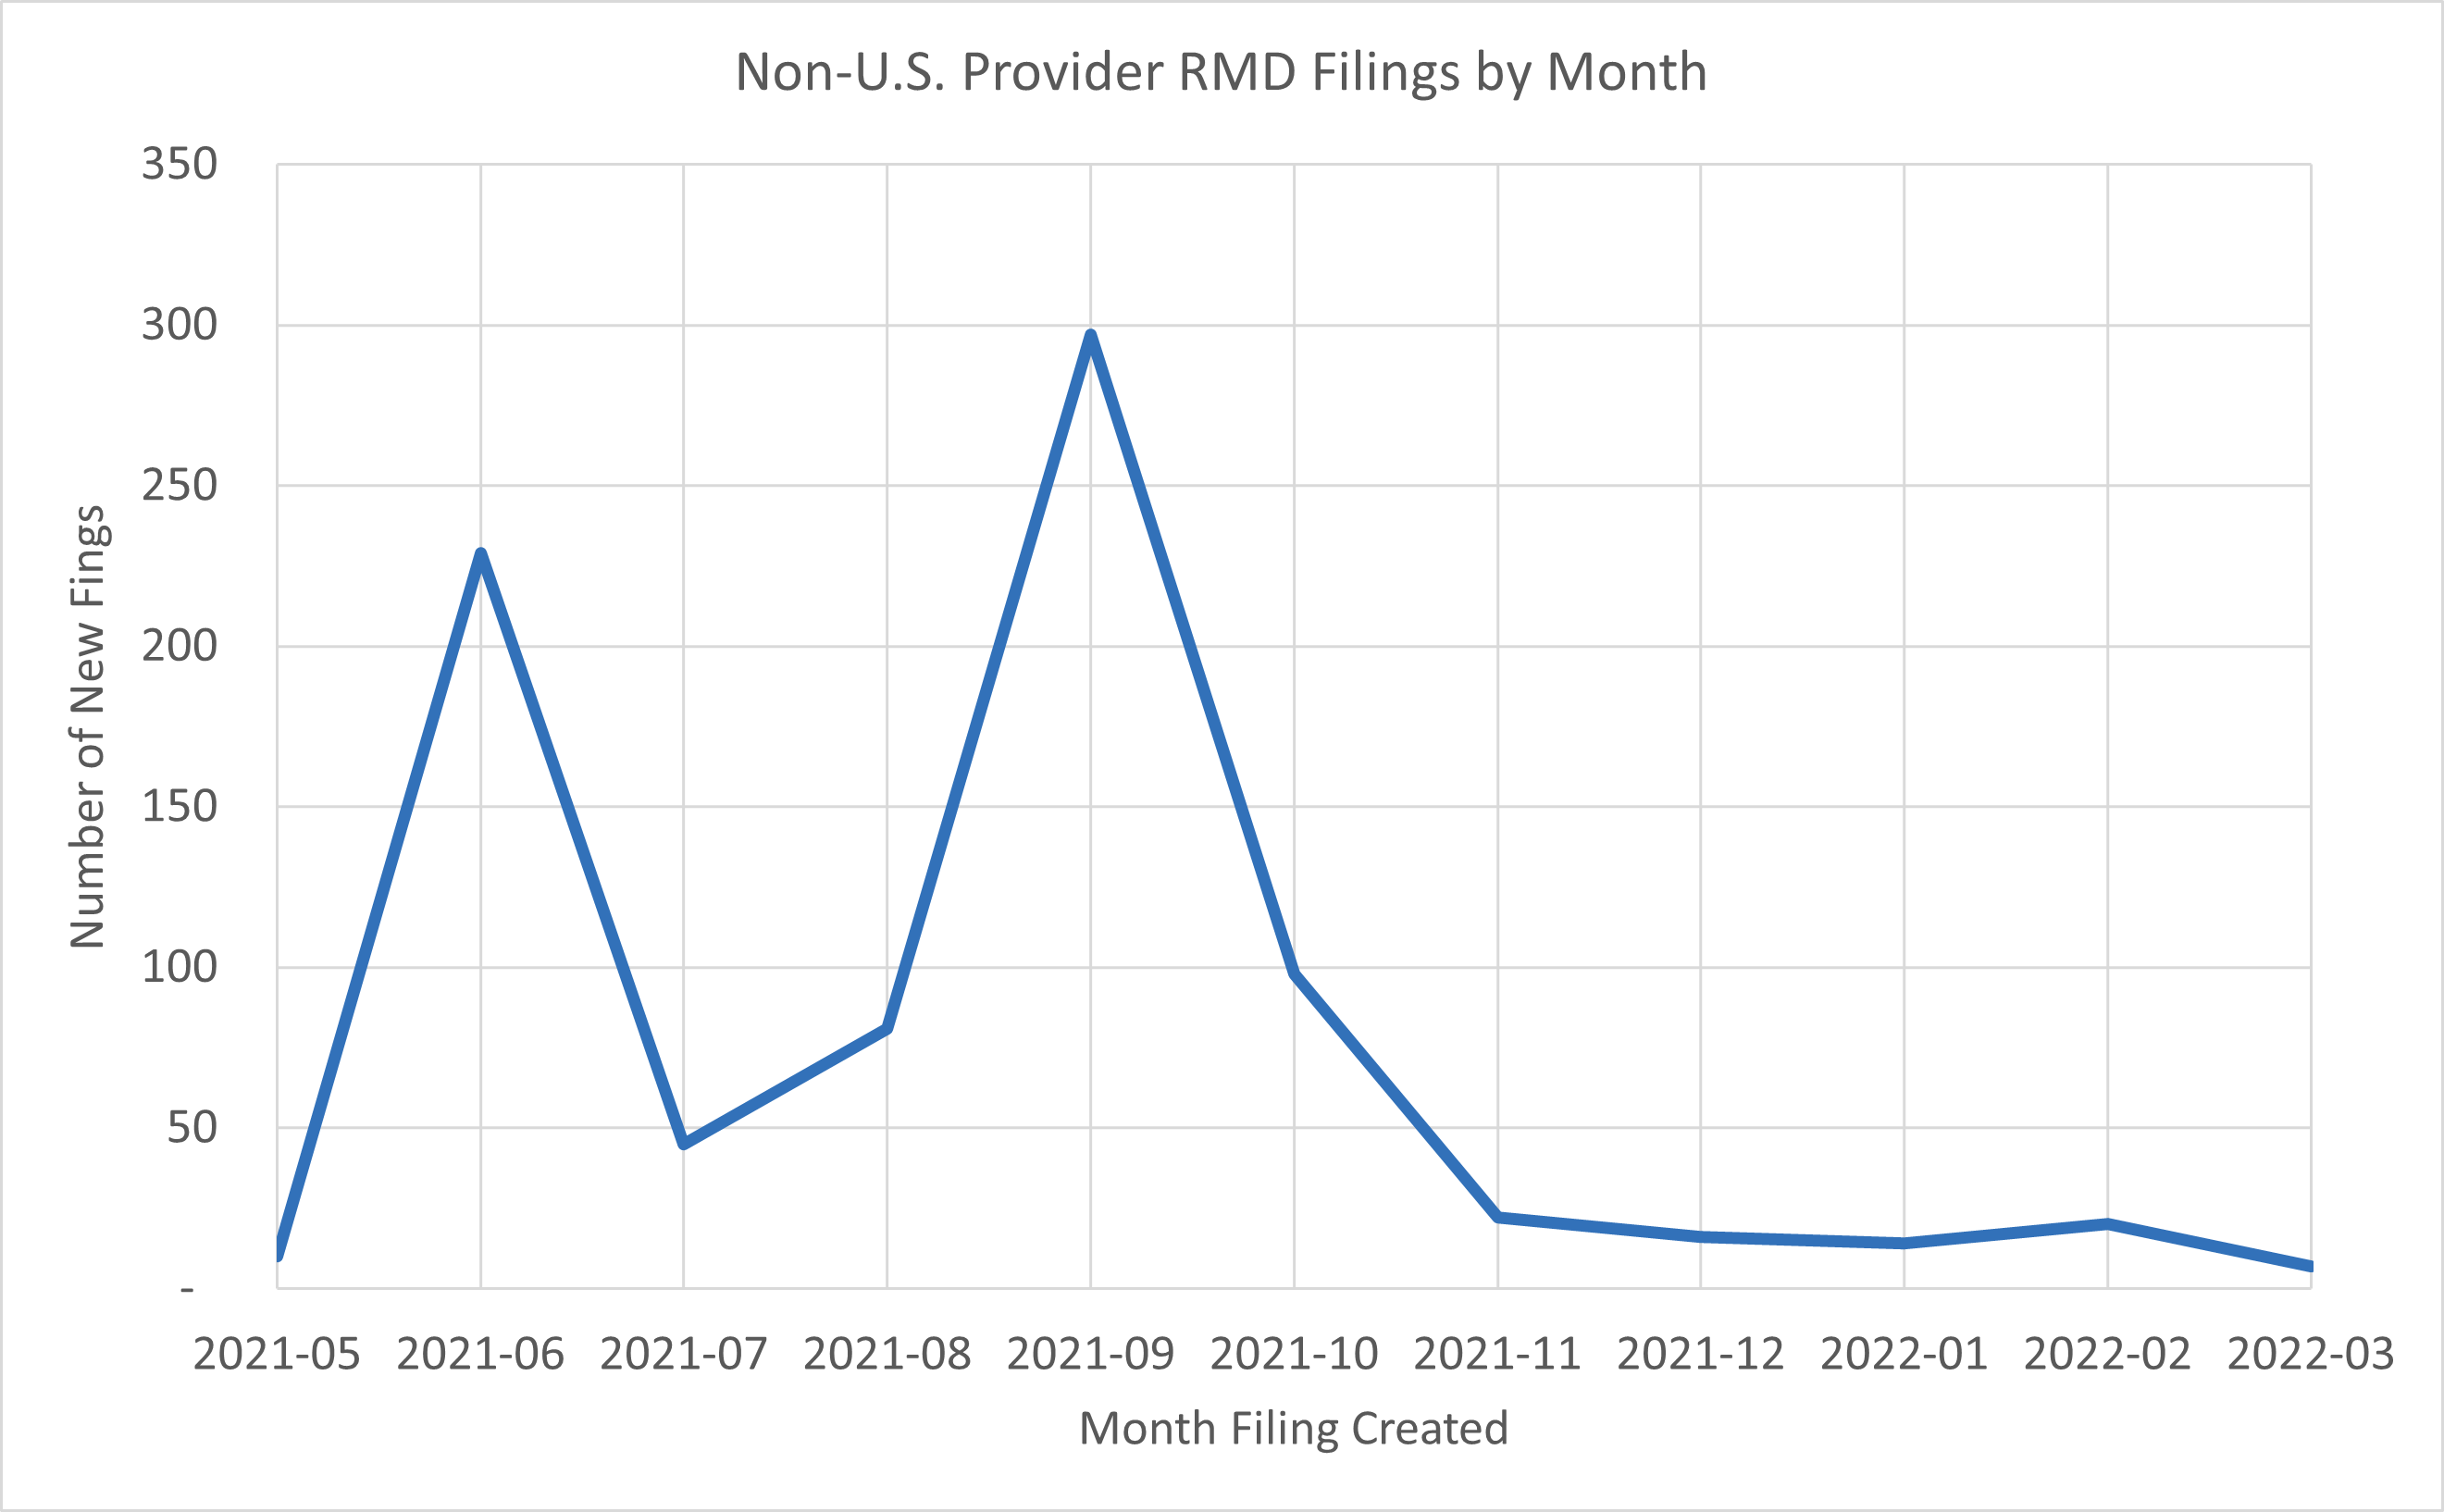 Non-U.S. Provider RMD Filings by Month